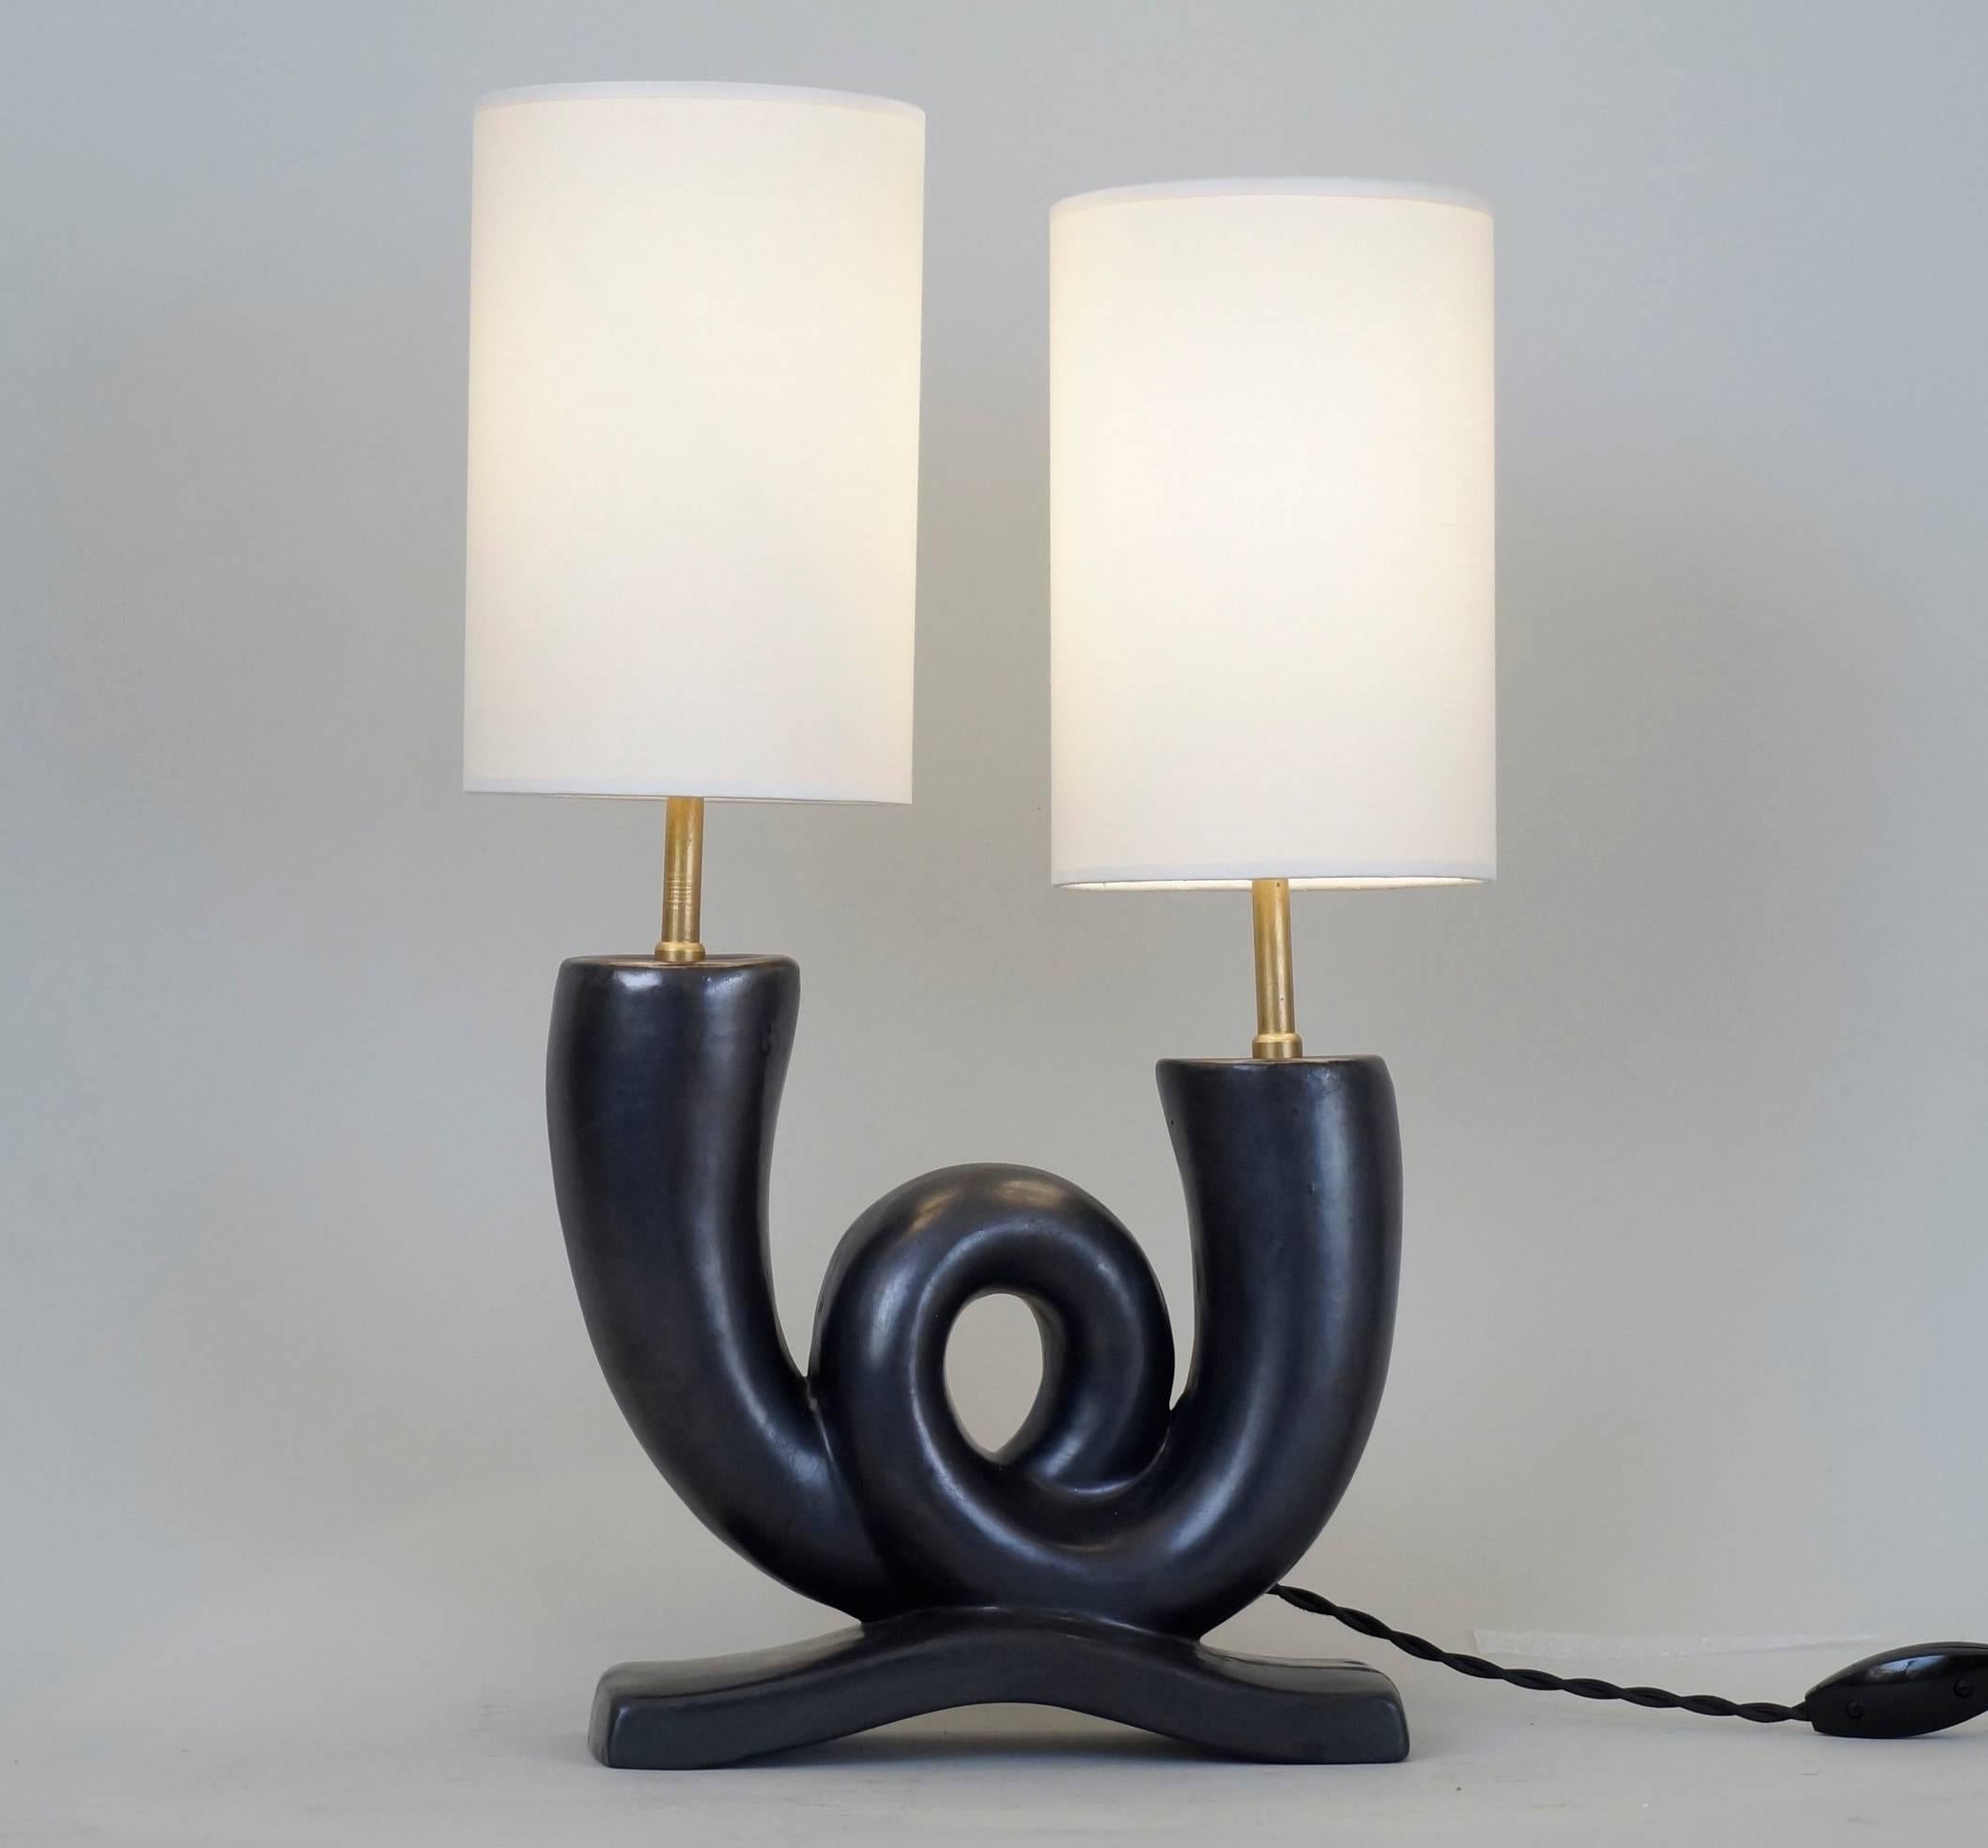 Table lamp in black satin ceramic.
Stamp on the back: Made in France.
Custom-made lampshade.
Rewired with twisted silk cord. 
US plug on request.
Ceramic height: 20 cm - 7.9in.
Height with lampshade: 41 cm - 16.1in.





